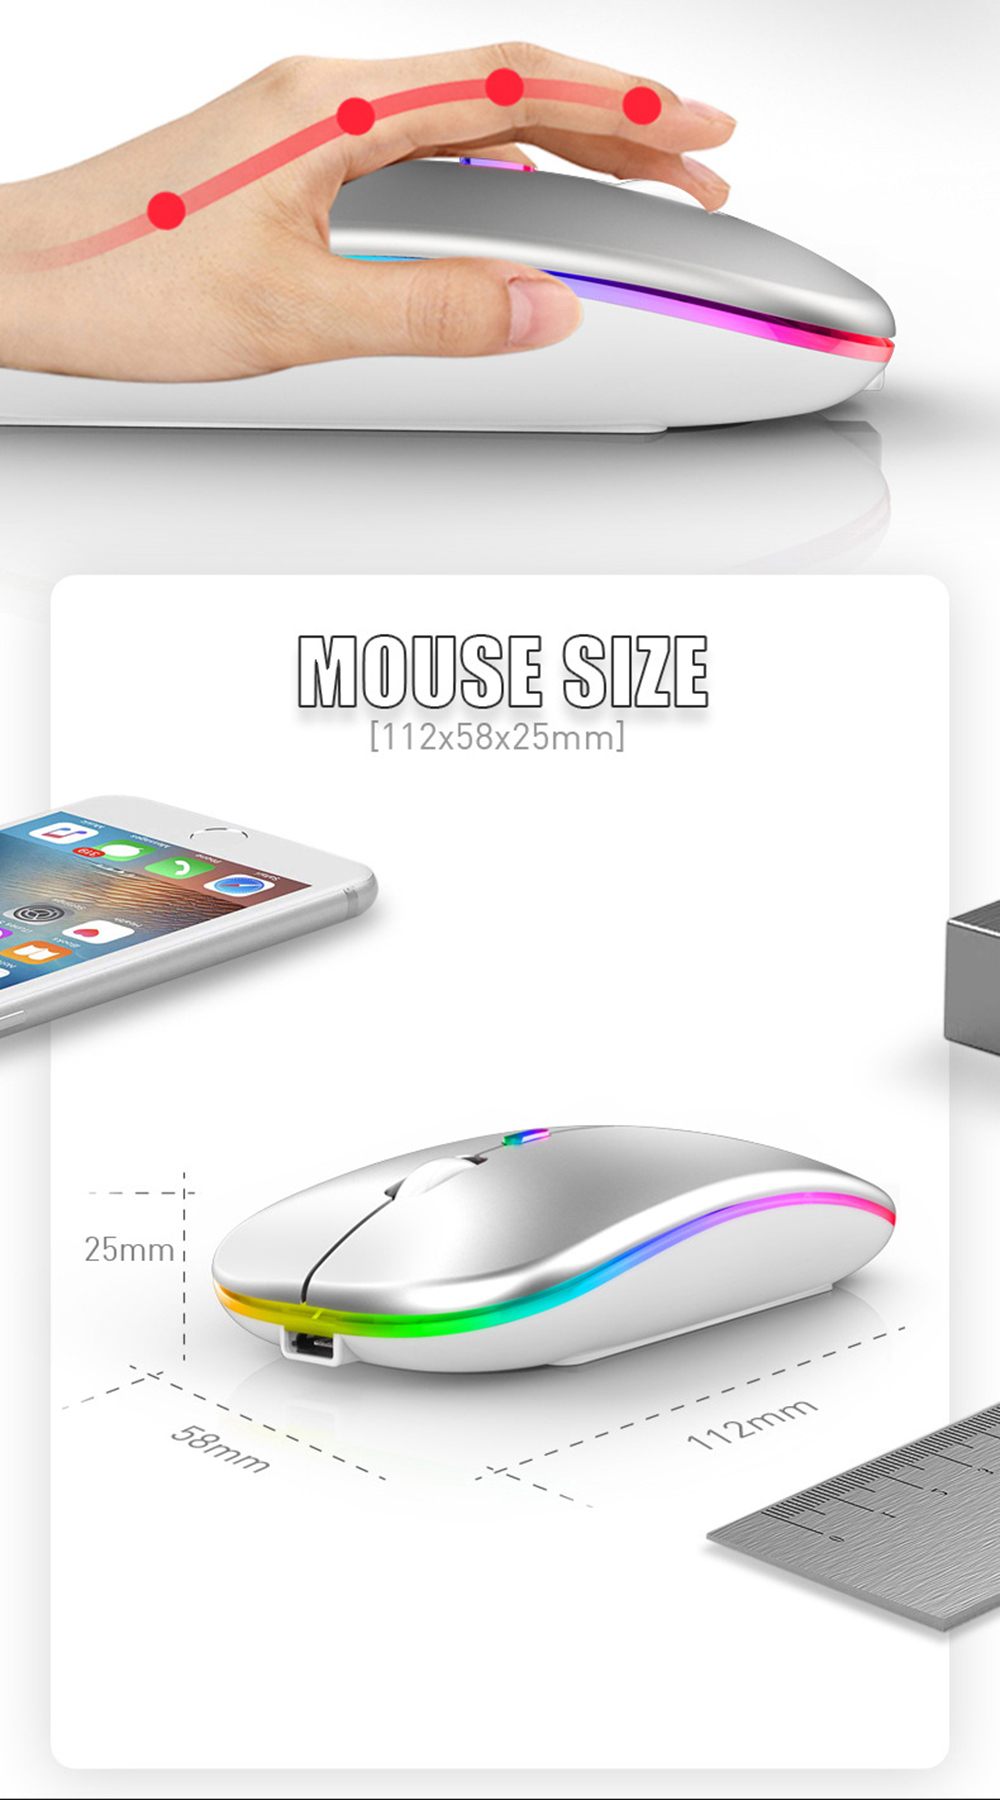 Dual Mode BT3.0/5.2 2.4G Wireless Mouse Adjustable 800-1600DPI Rechargeable LED Light Silent Mice for Laptop PC